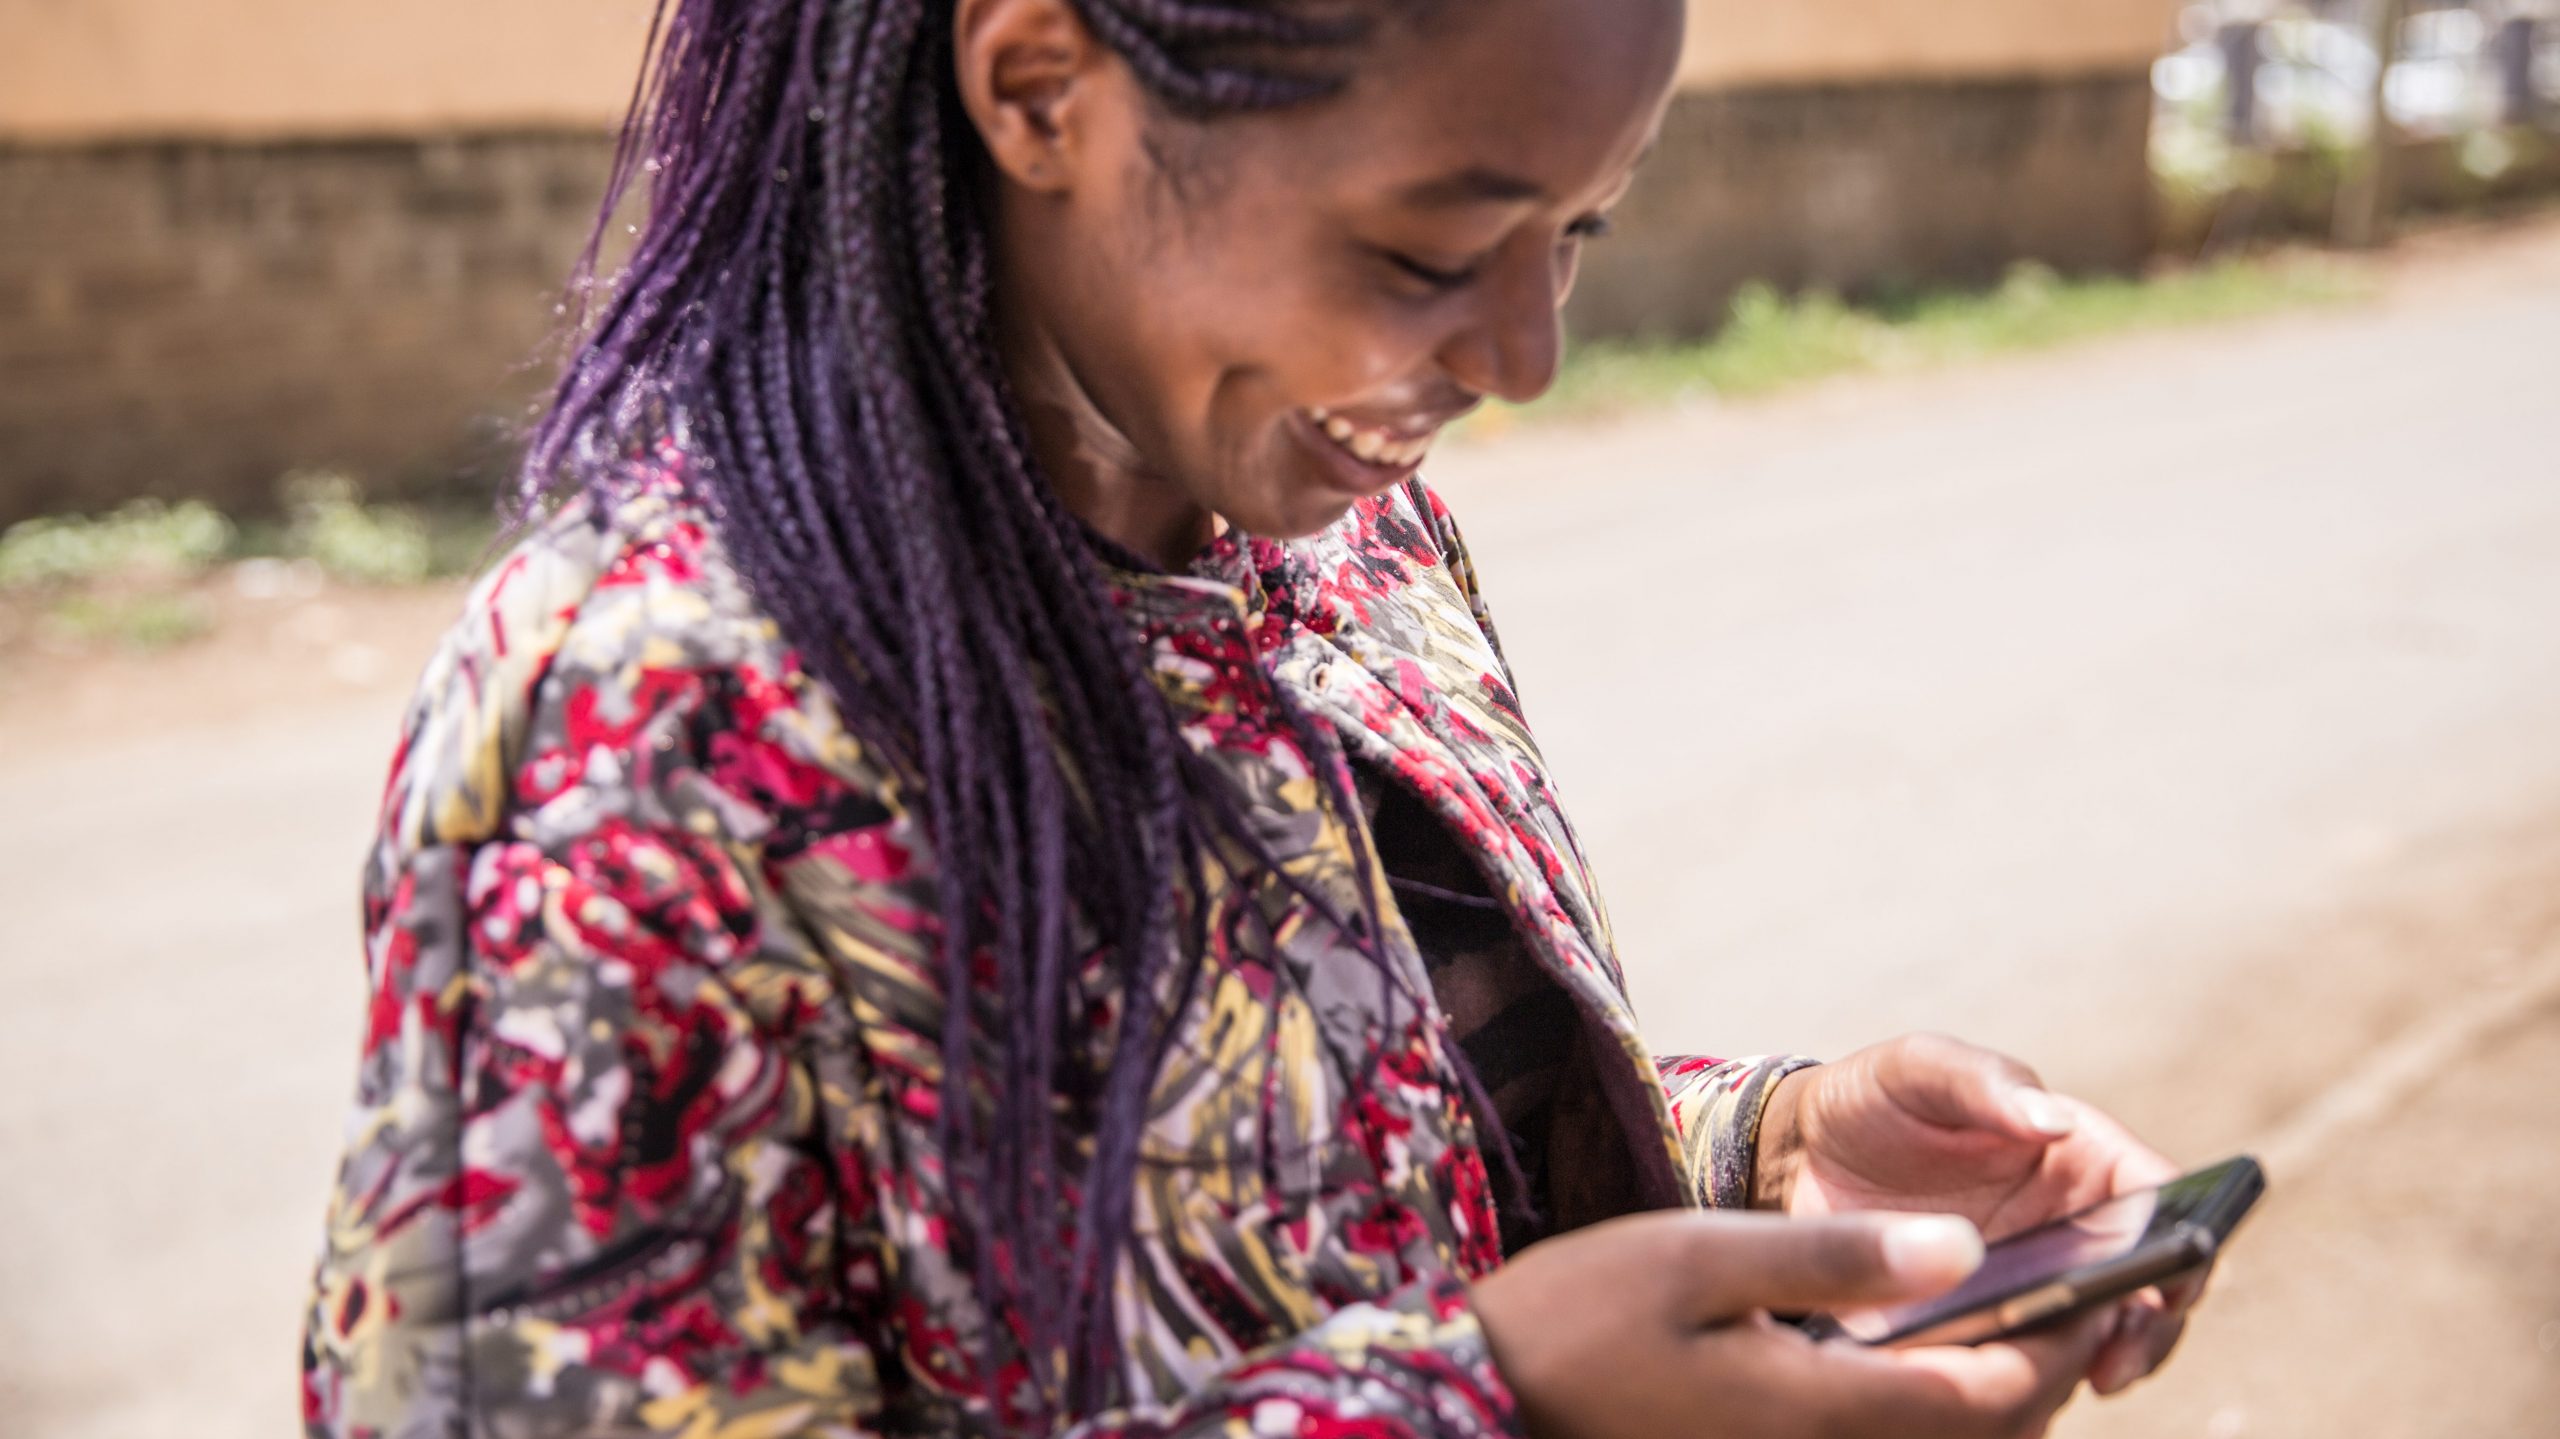 Mobile connectivity in Sub-Saharan Africa: 4G and 3G connections overtake 2G for the first time